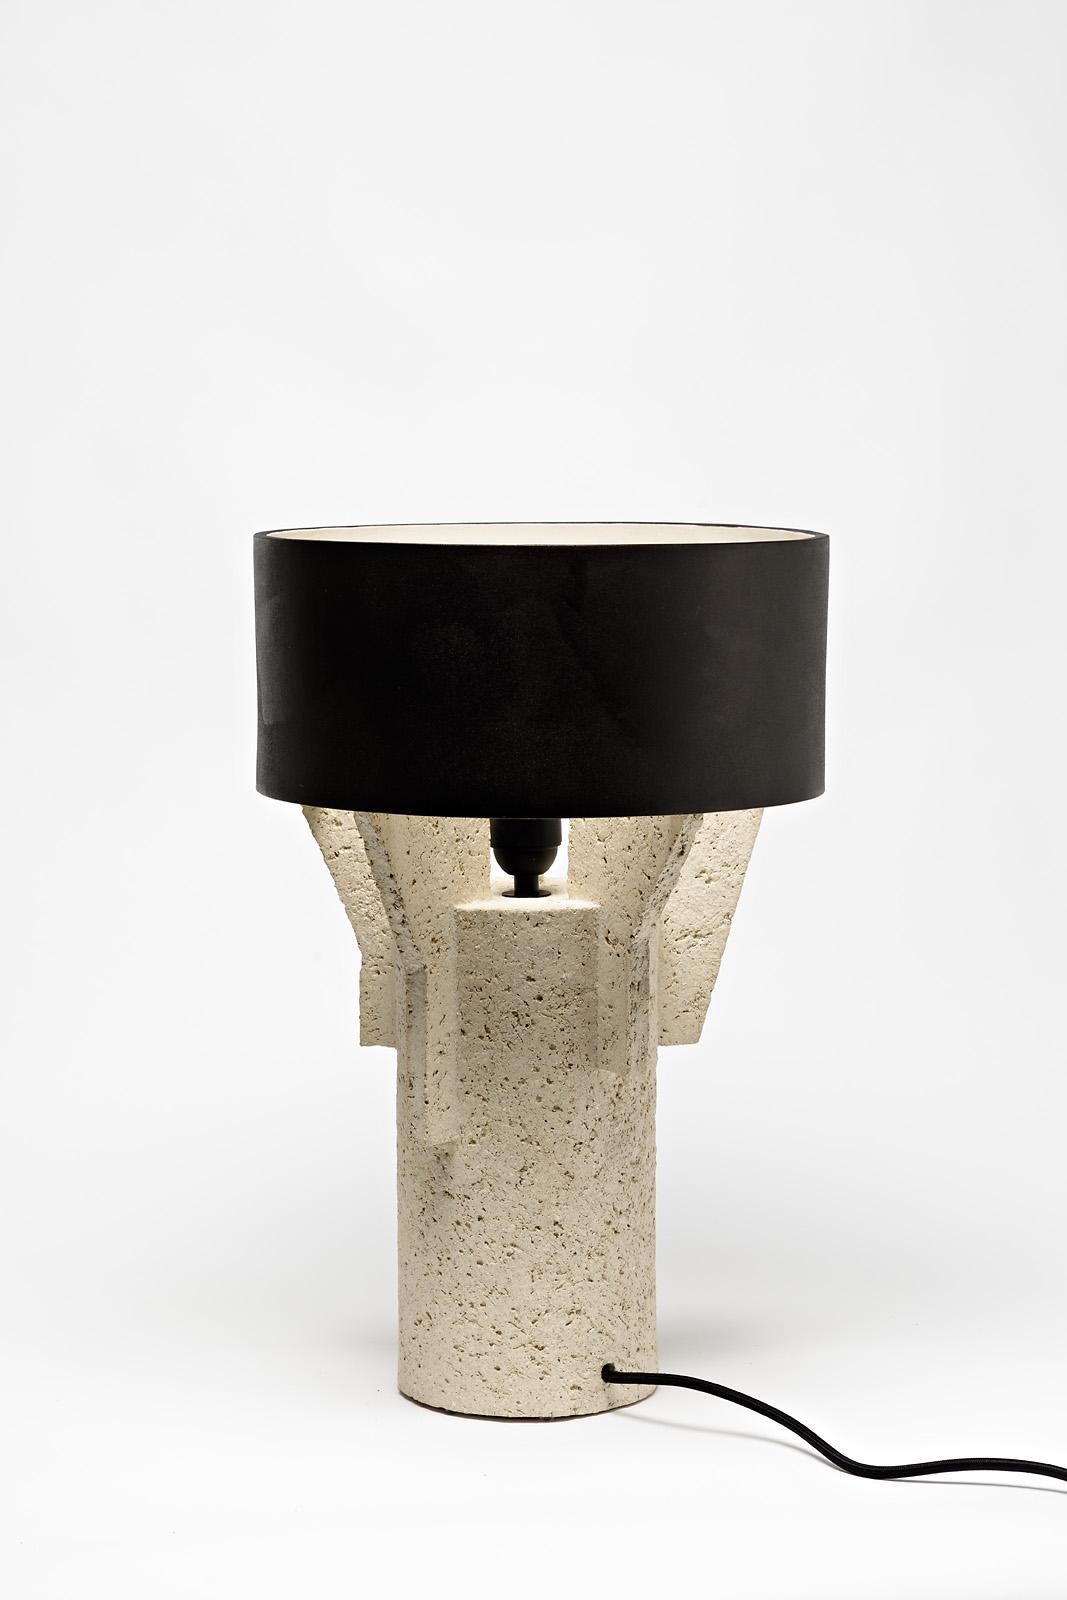 Contemporary Pair of Ceramic Table Lamps by Denis Castaing with Brown Glaze, 2019